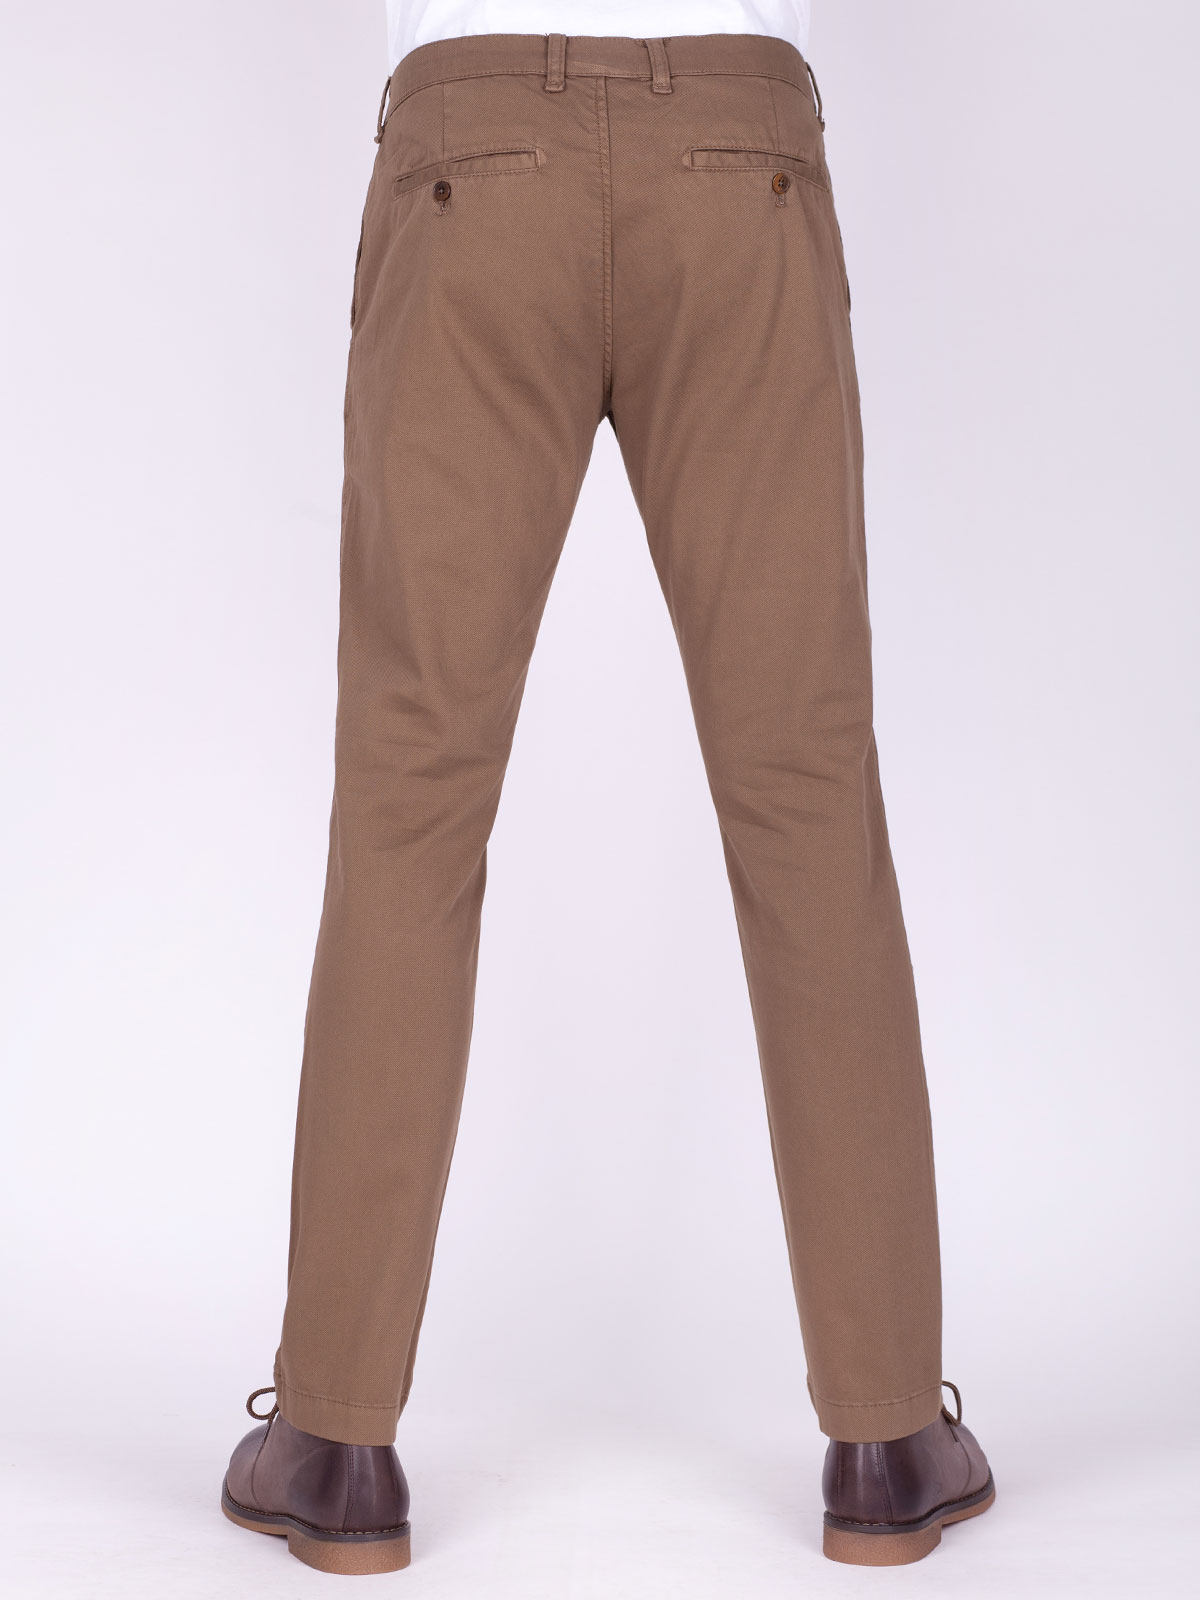 Buy Metal Solid Rayon Formal Pant for Men | Stylish Men's Wear Trousers for  Office or Party | Comfortable & Breathable Formal Trousers Pants Camel  Brown at Amazon.in